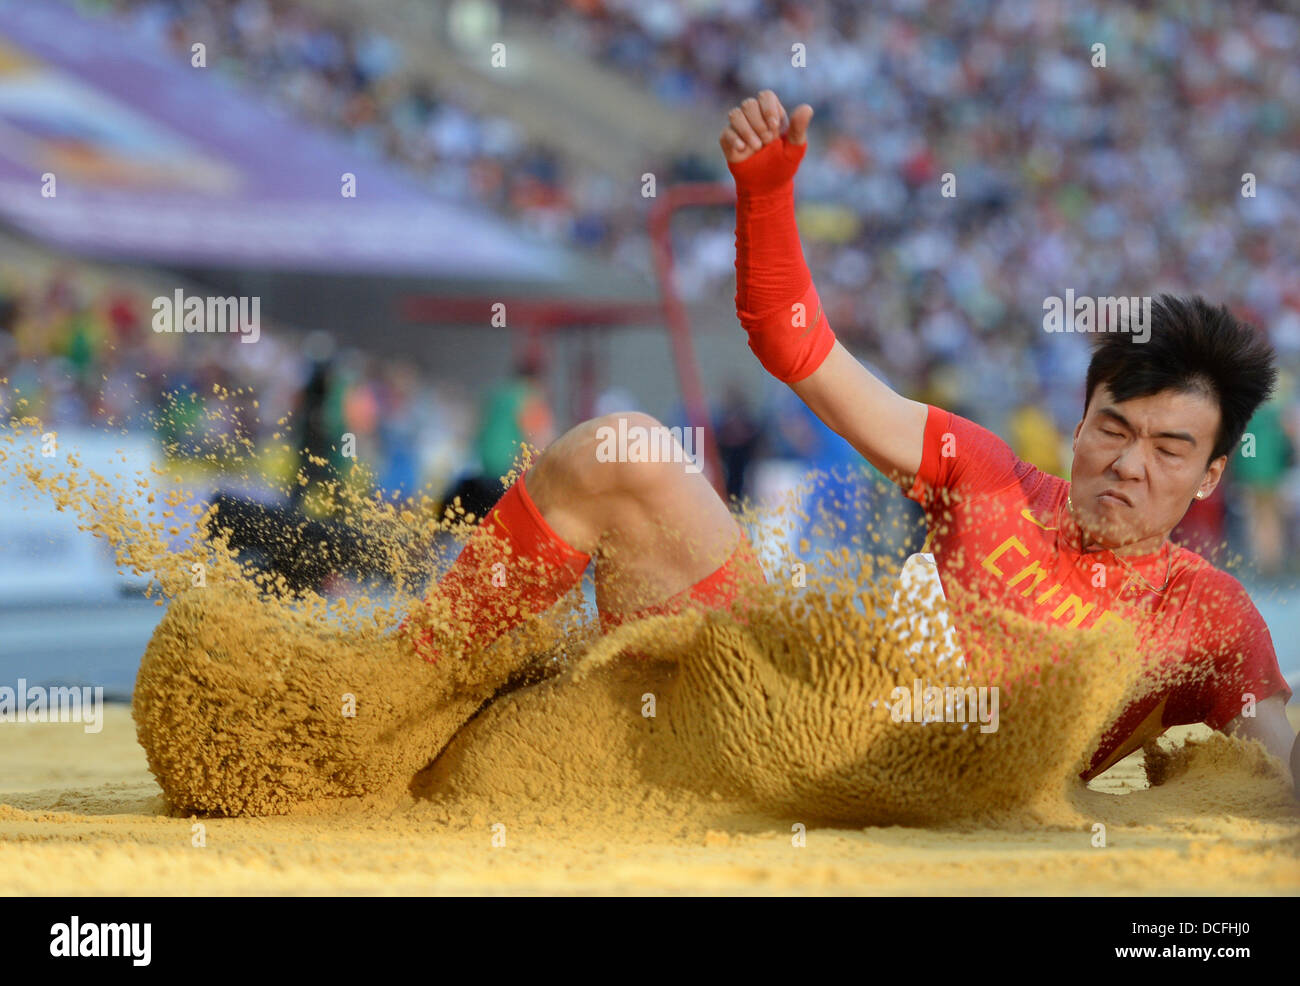 Moscow, Russia. 16th Aug, 2013. Jinzhe Li of China competes in the Men's Long Jump Final at the 14th IAAF World Championships in Athletics at Luzhniki Stadium in Moscow, Russia, 16 August 2013. Photo: Bernd Thissen/dpa/Alamy Live News Stock Photo